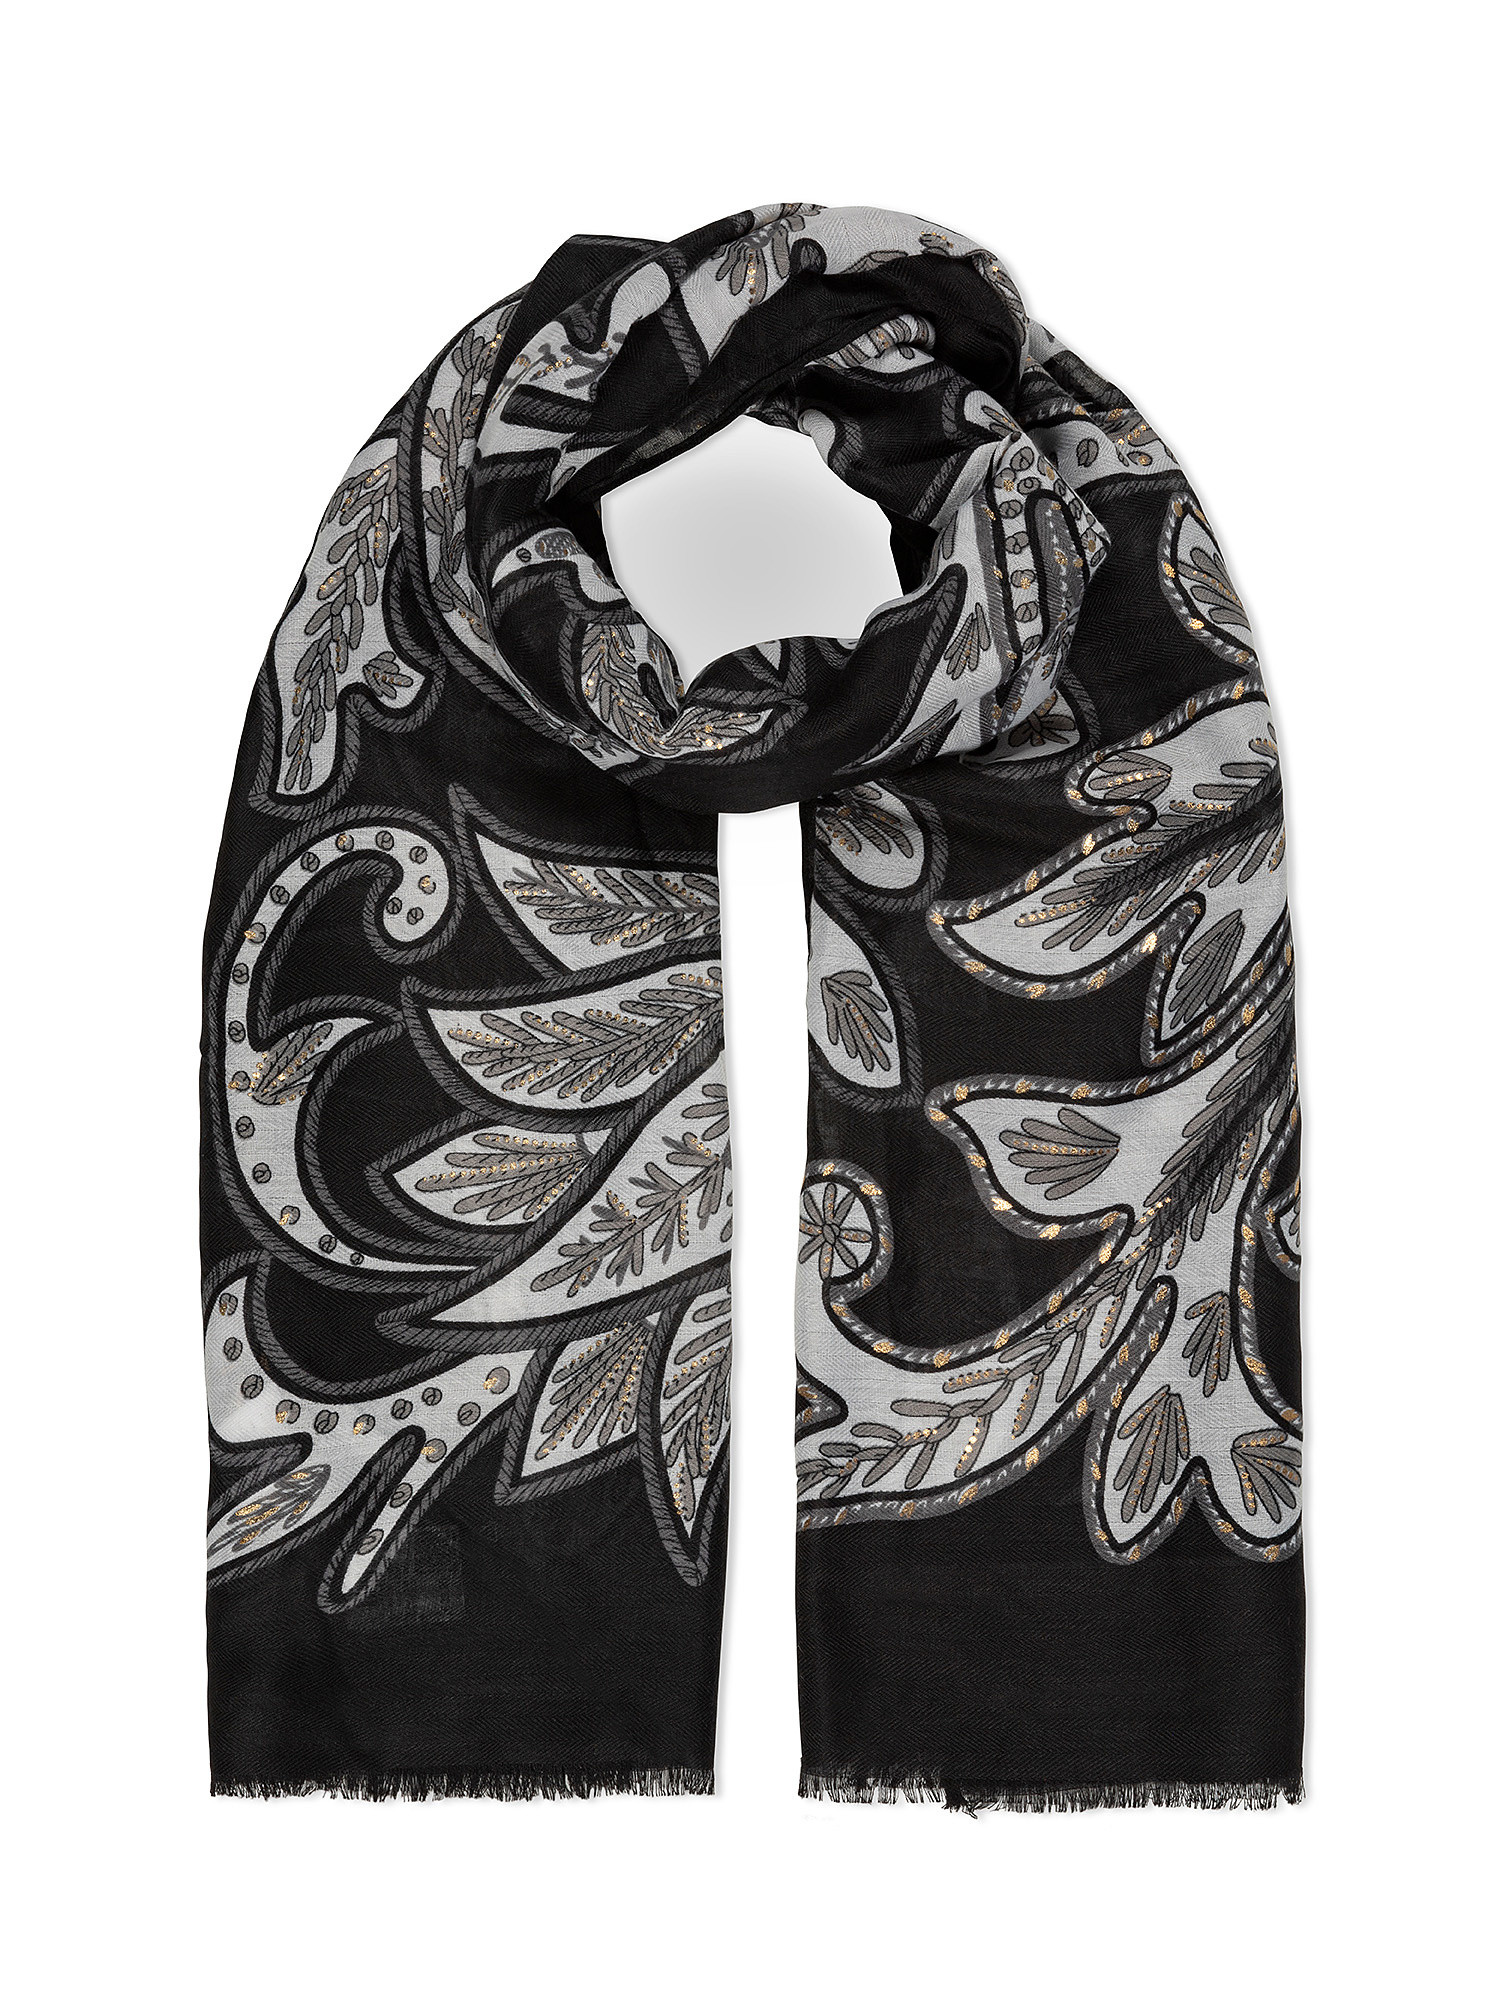 Koan - Scarf with floral print, Grey, large image number 0